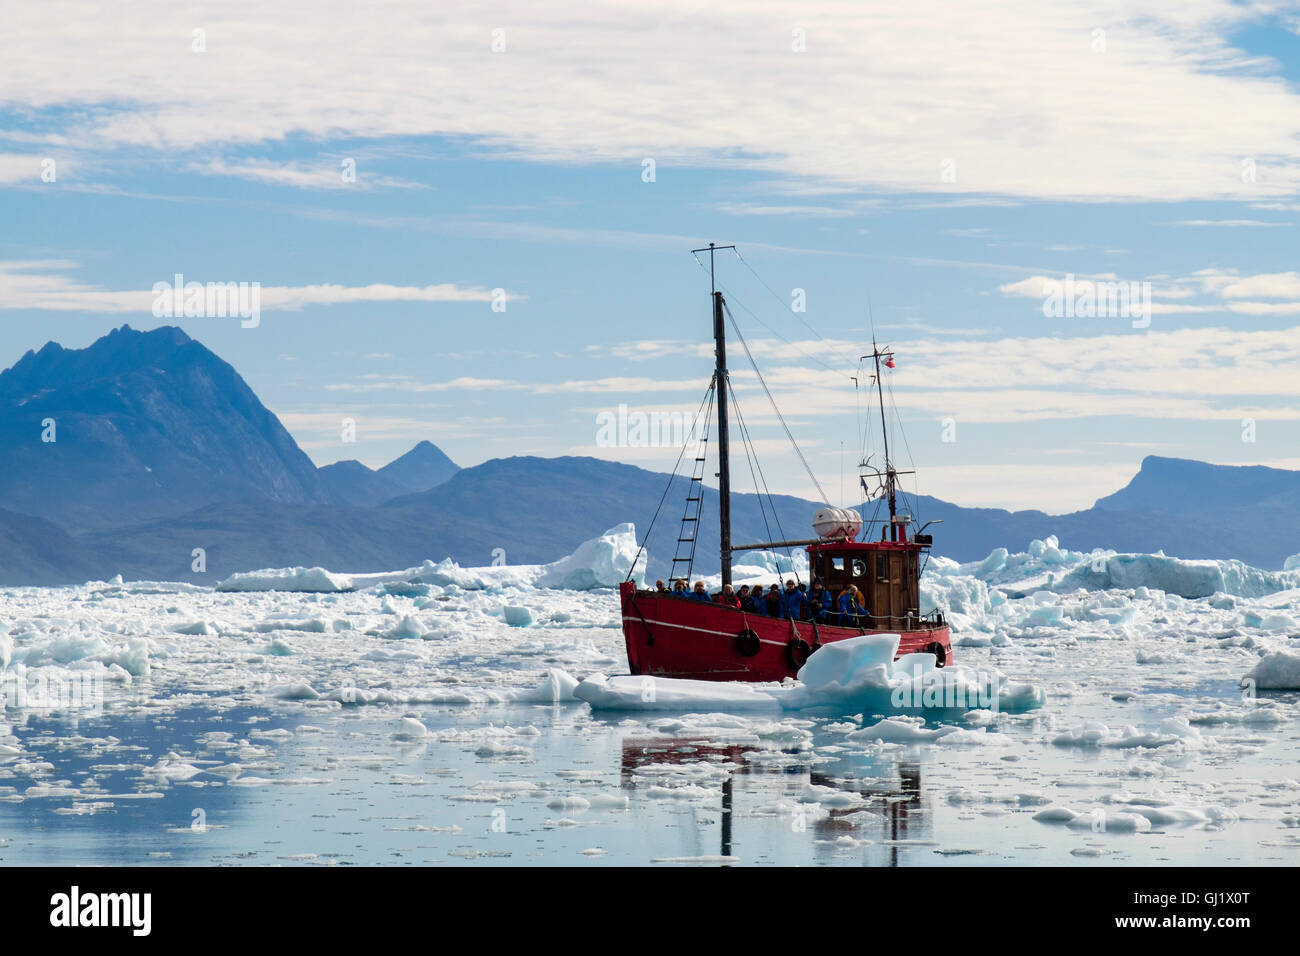 Tourists on old fishing boat visiting icefjord with sea ice and icebergs from Qooroq ice fjord in Tunulliarfik Fjord summer 2016. Narsarsuaq Greenland Stock Photo